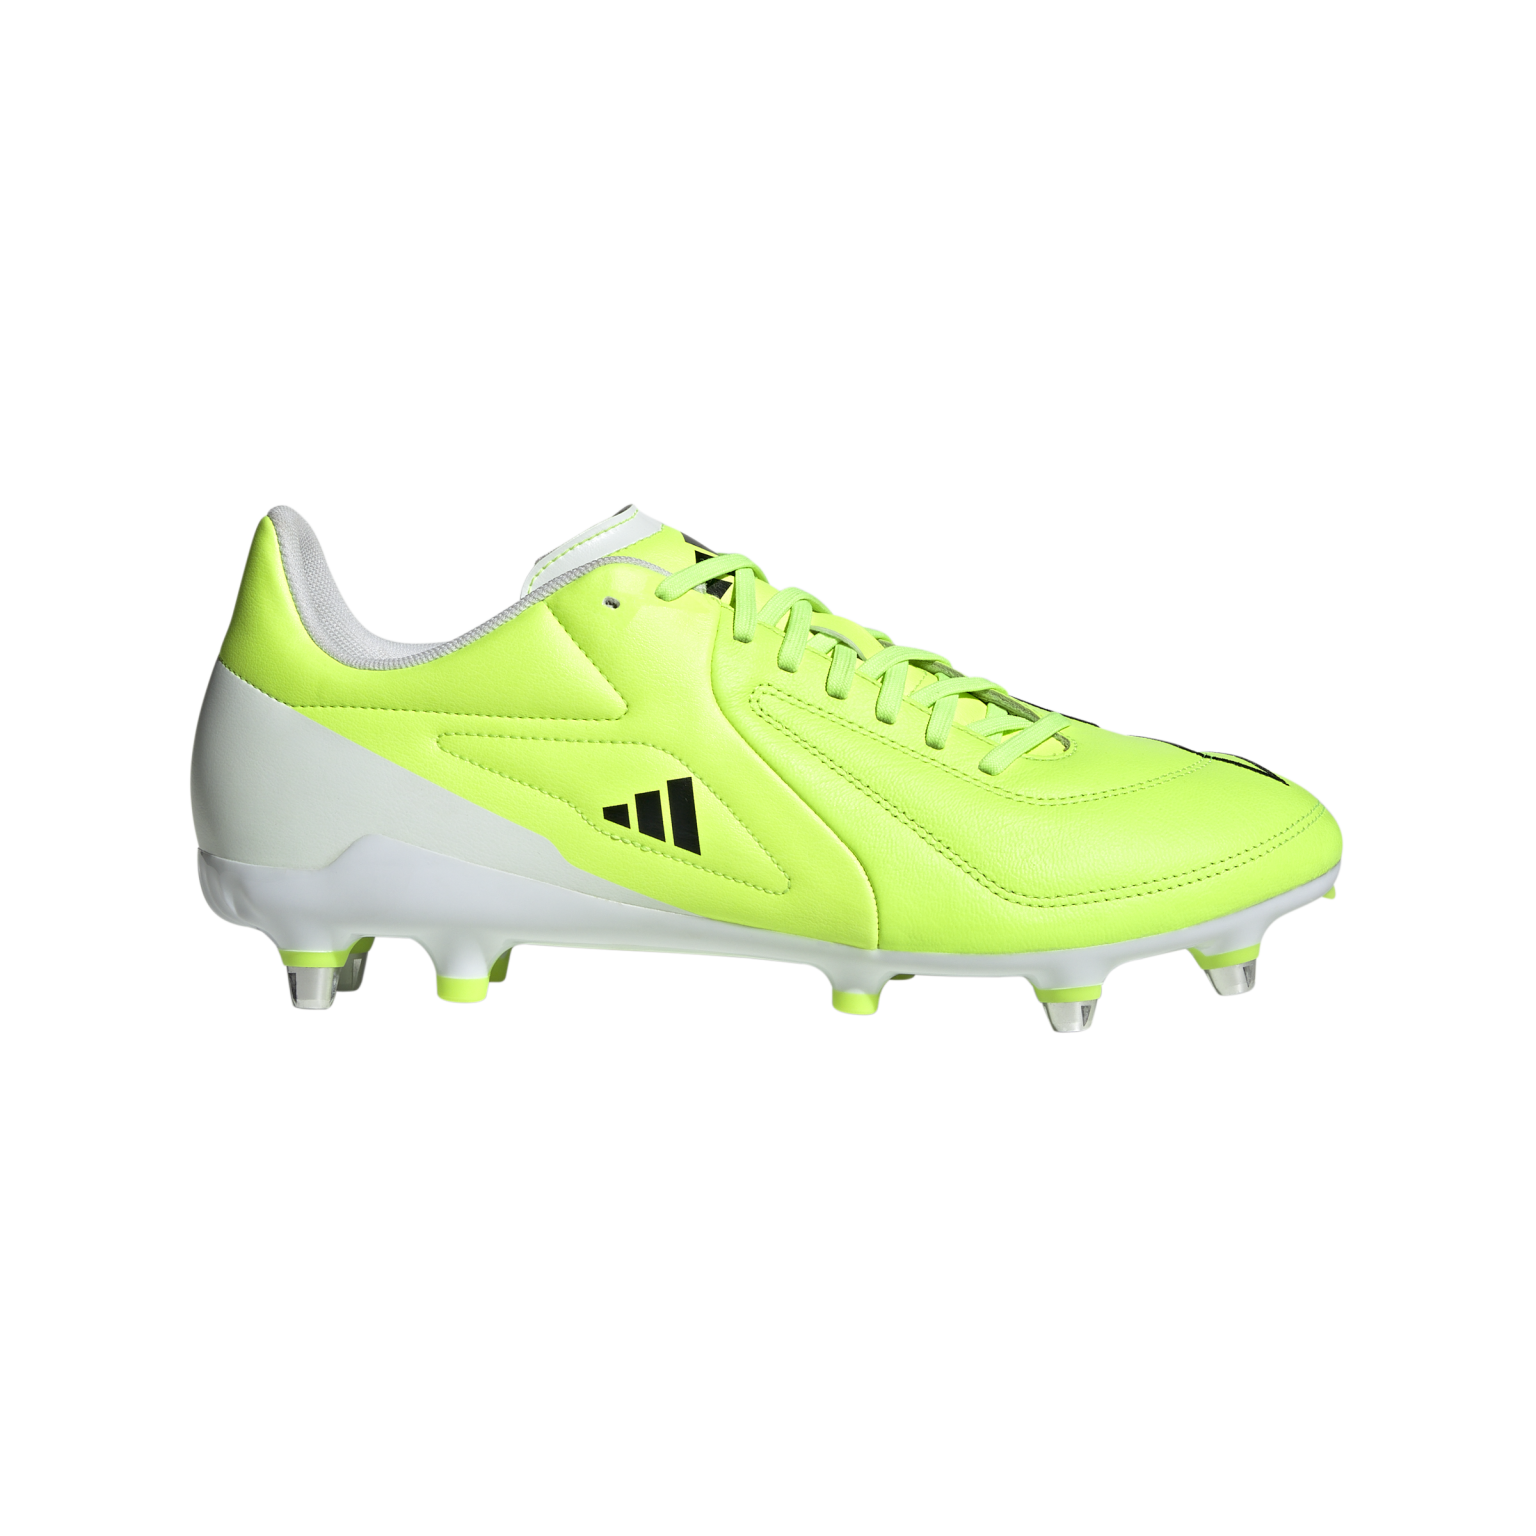 adidas RS15 Rugby Boots | Firm & Soft Ground | The Rugby Shop